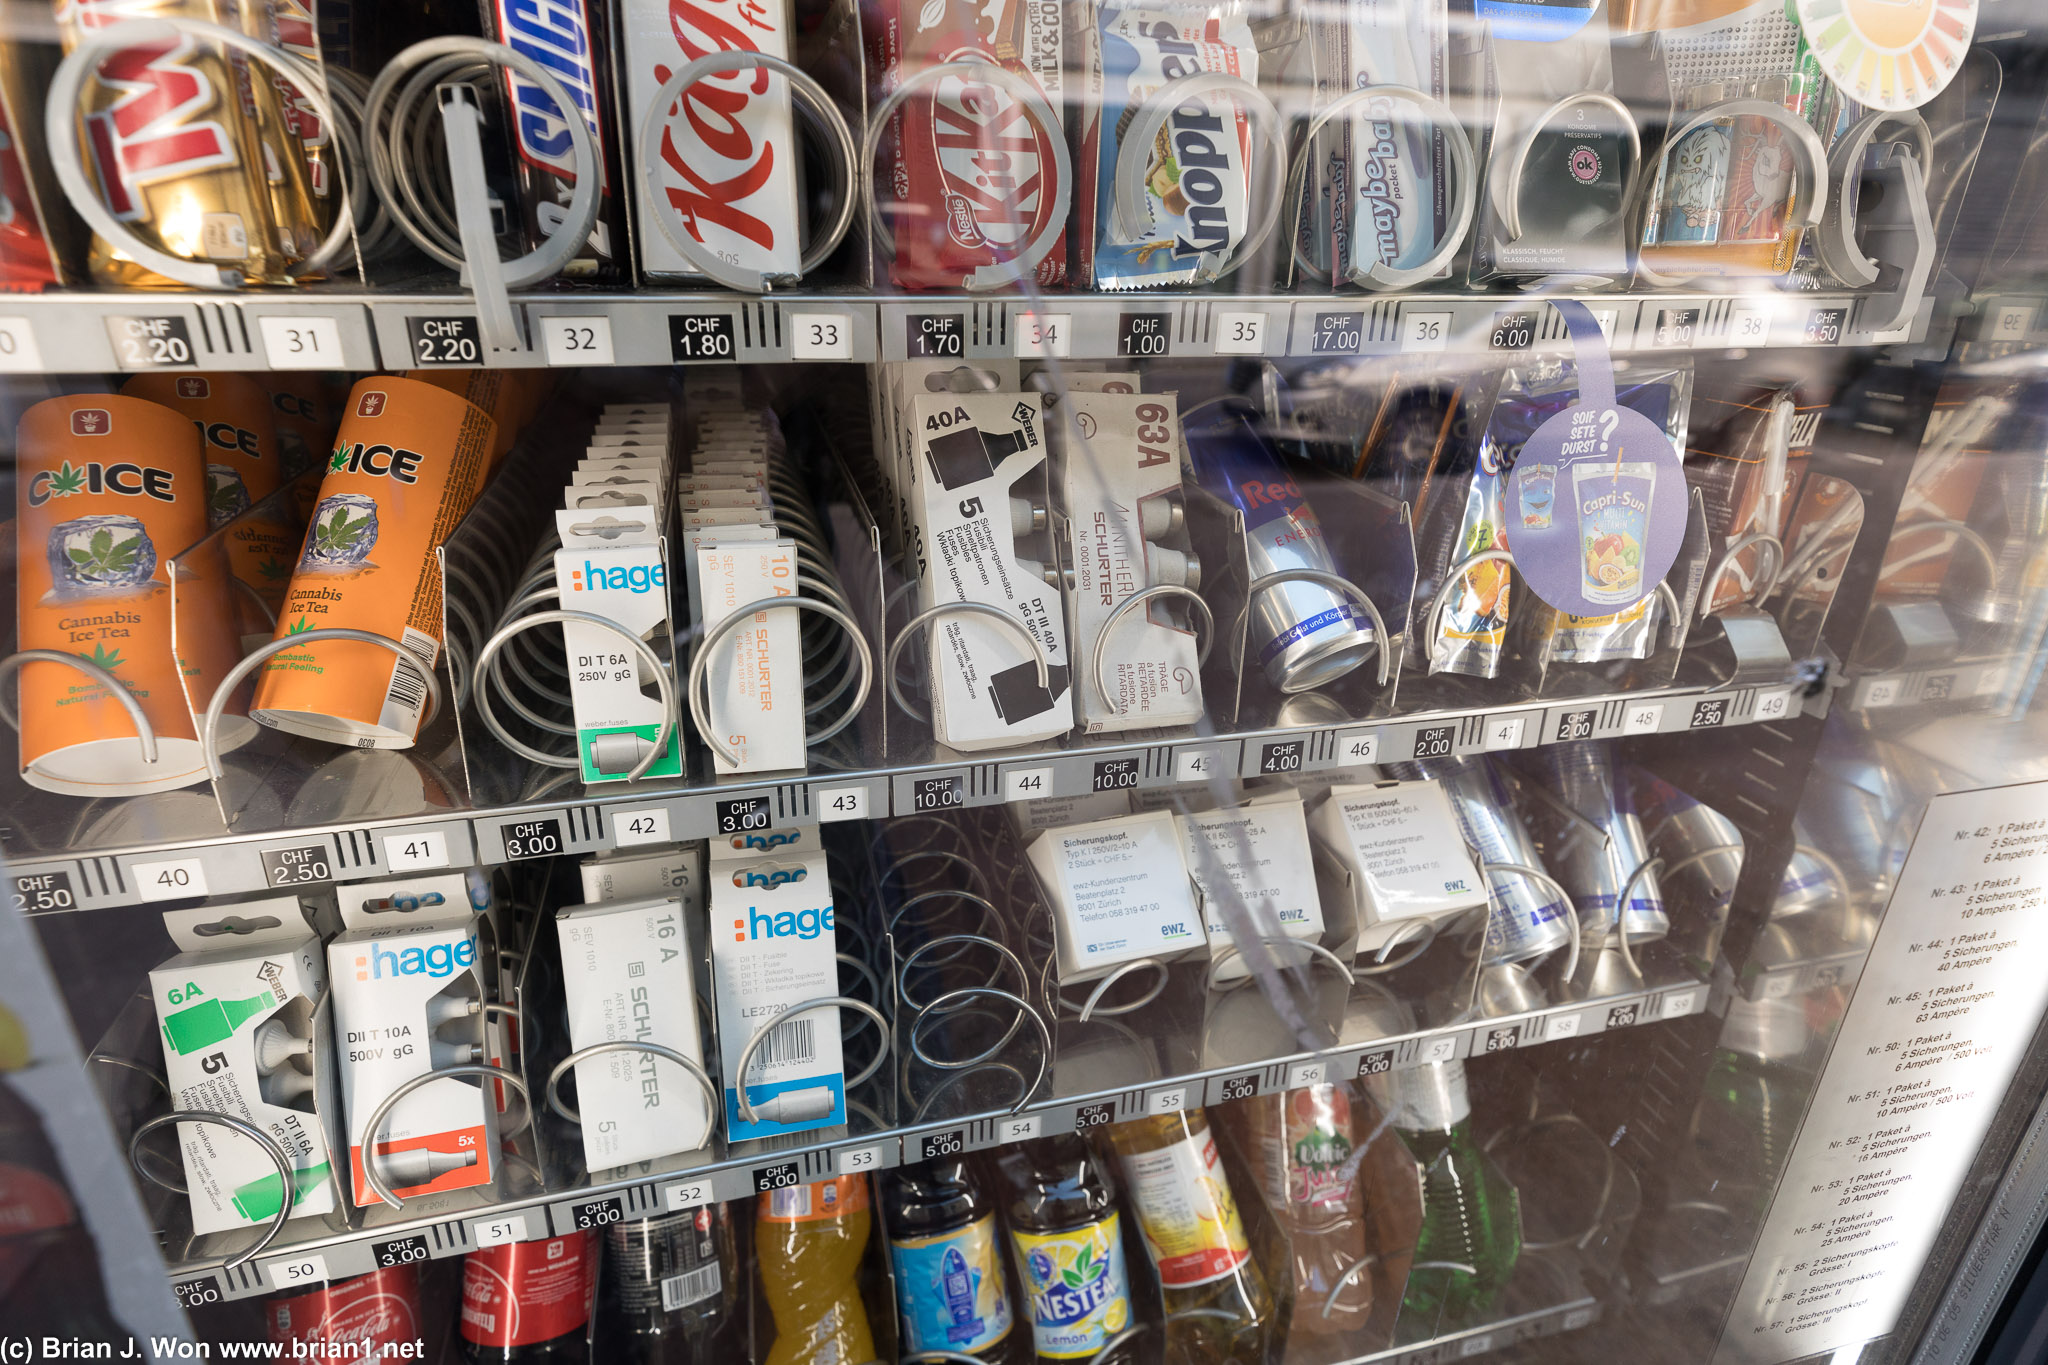 Vending machines here serve candy, drinks, household fuses...?!?